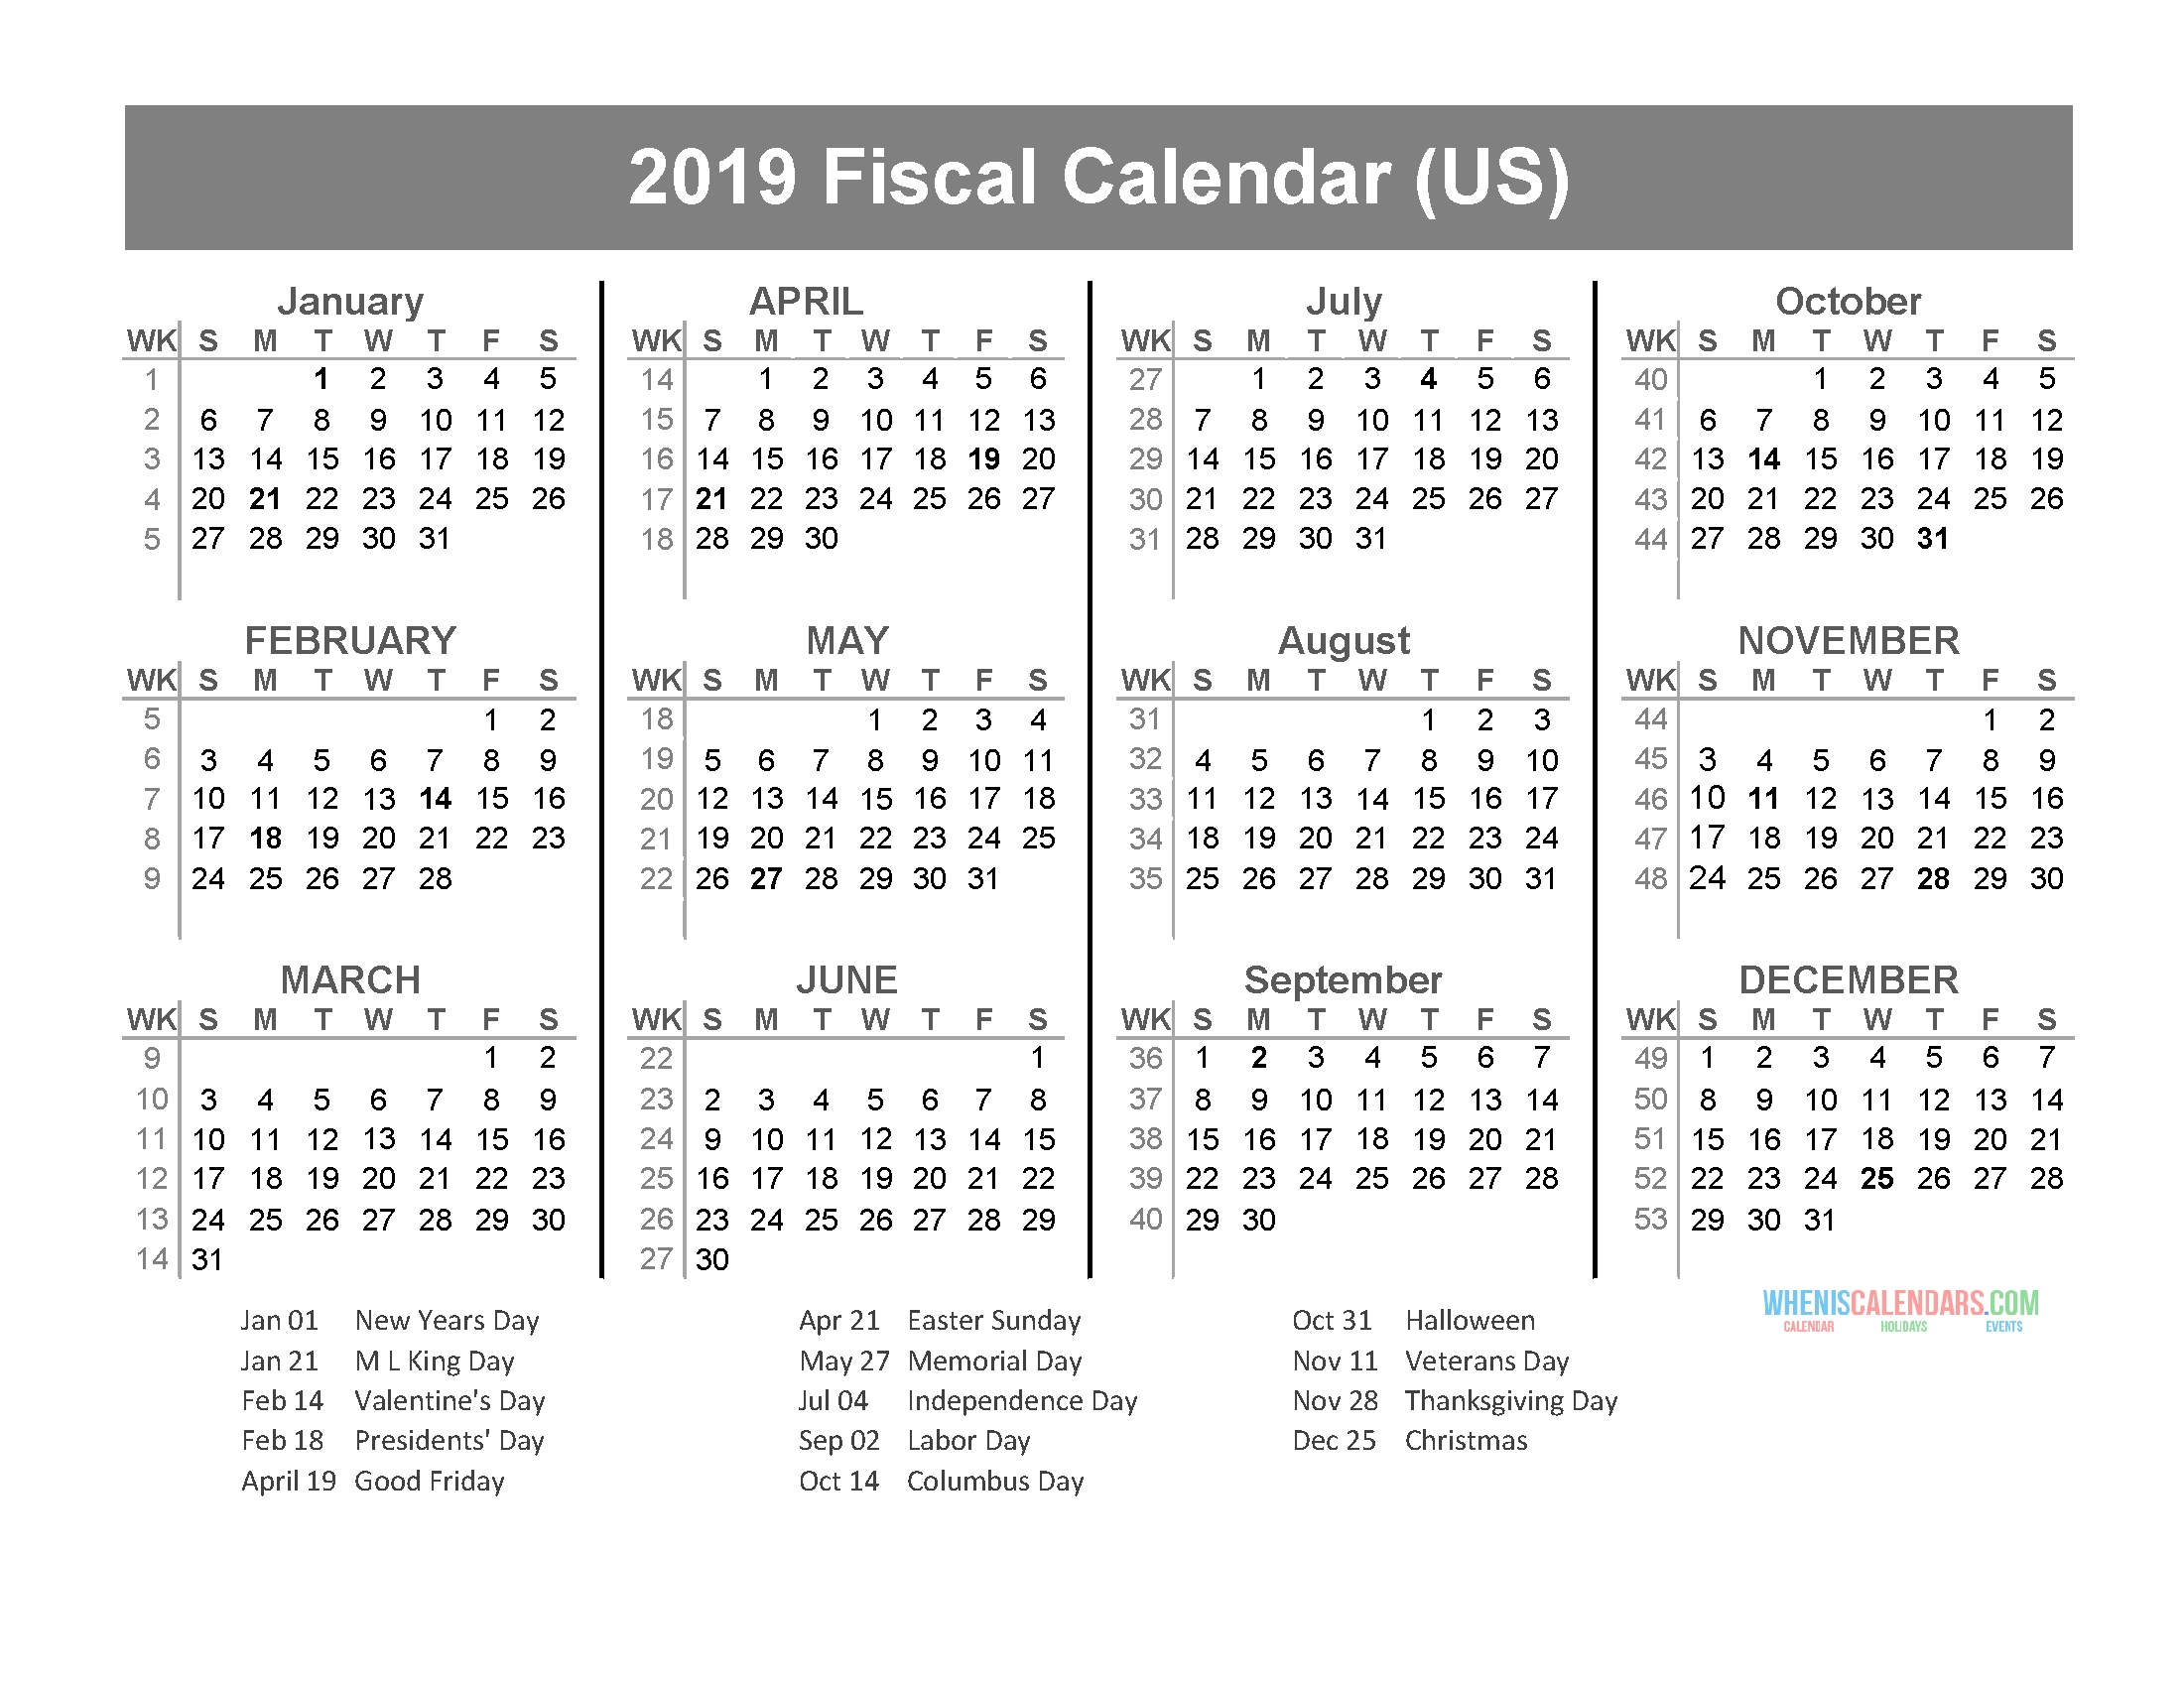 Fiscal Year 2019 Calendar With Us Holidays (January To regarding Week Numbers Fiscal Year 2019-2020